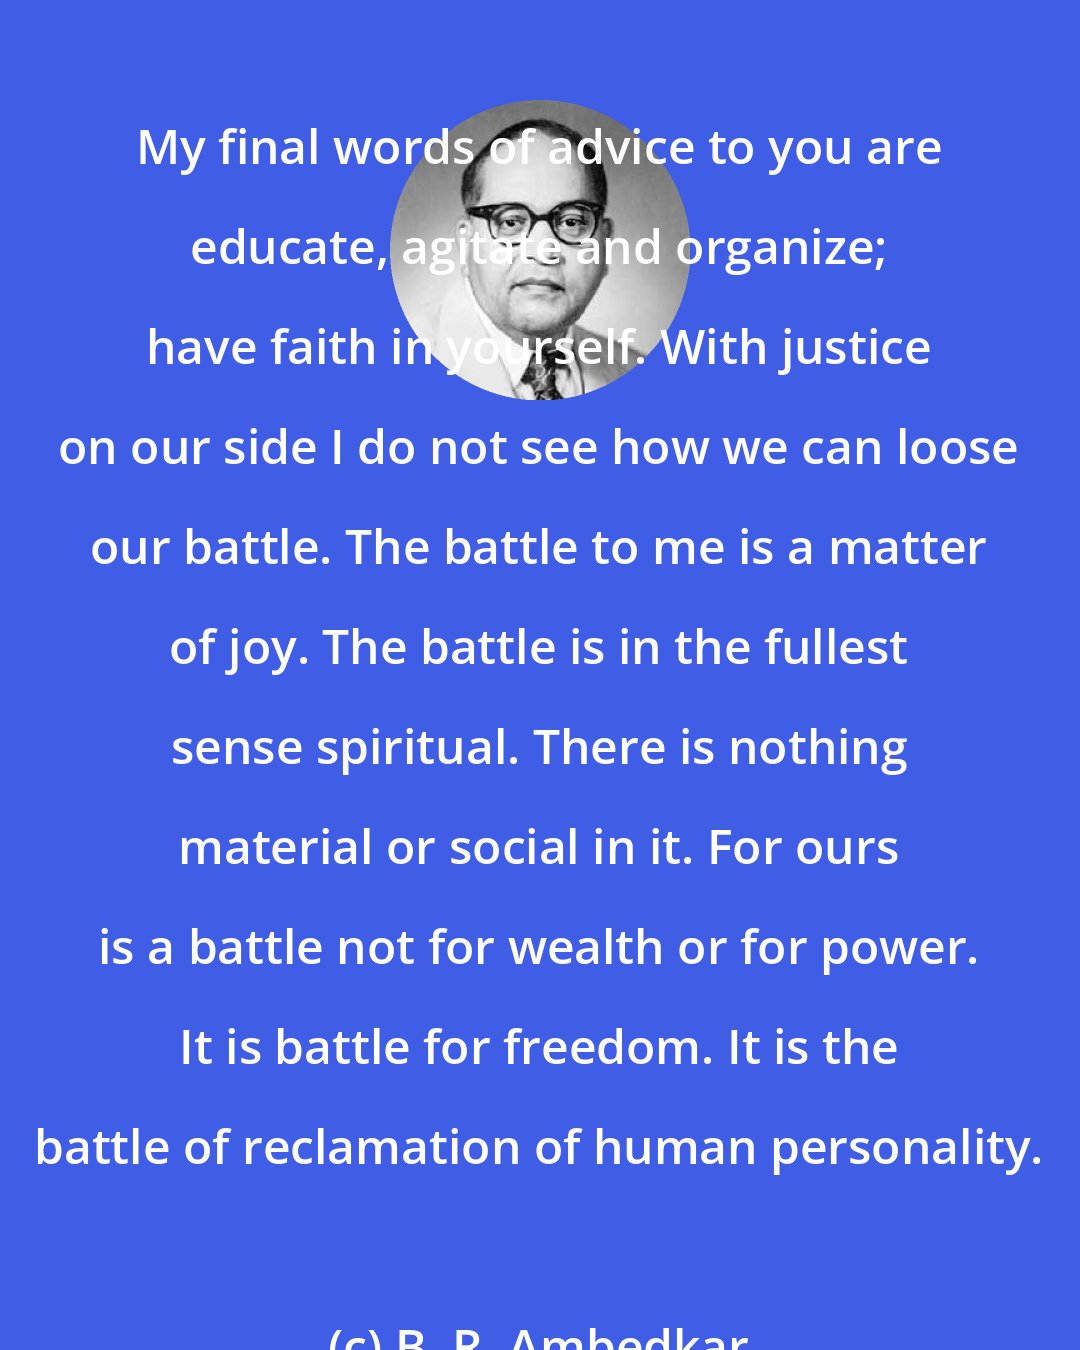 B. R. Ambedkar: My final words of advice to you are educate, agitate and organize; have faith in yourself. With justice on our side I do not see how we can loose our battle. The battle to me is a matter of joy. The battle is in the fullest sense spiritual. There is nothing material or social in it. For ours is a battle not for wealth or for power. It is battle for freedom. It is the battle of reclamation of human personality.